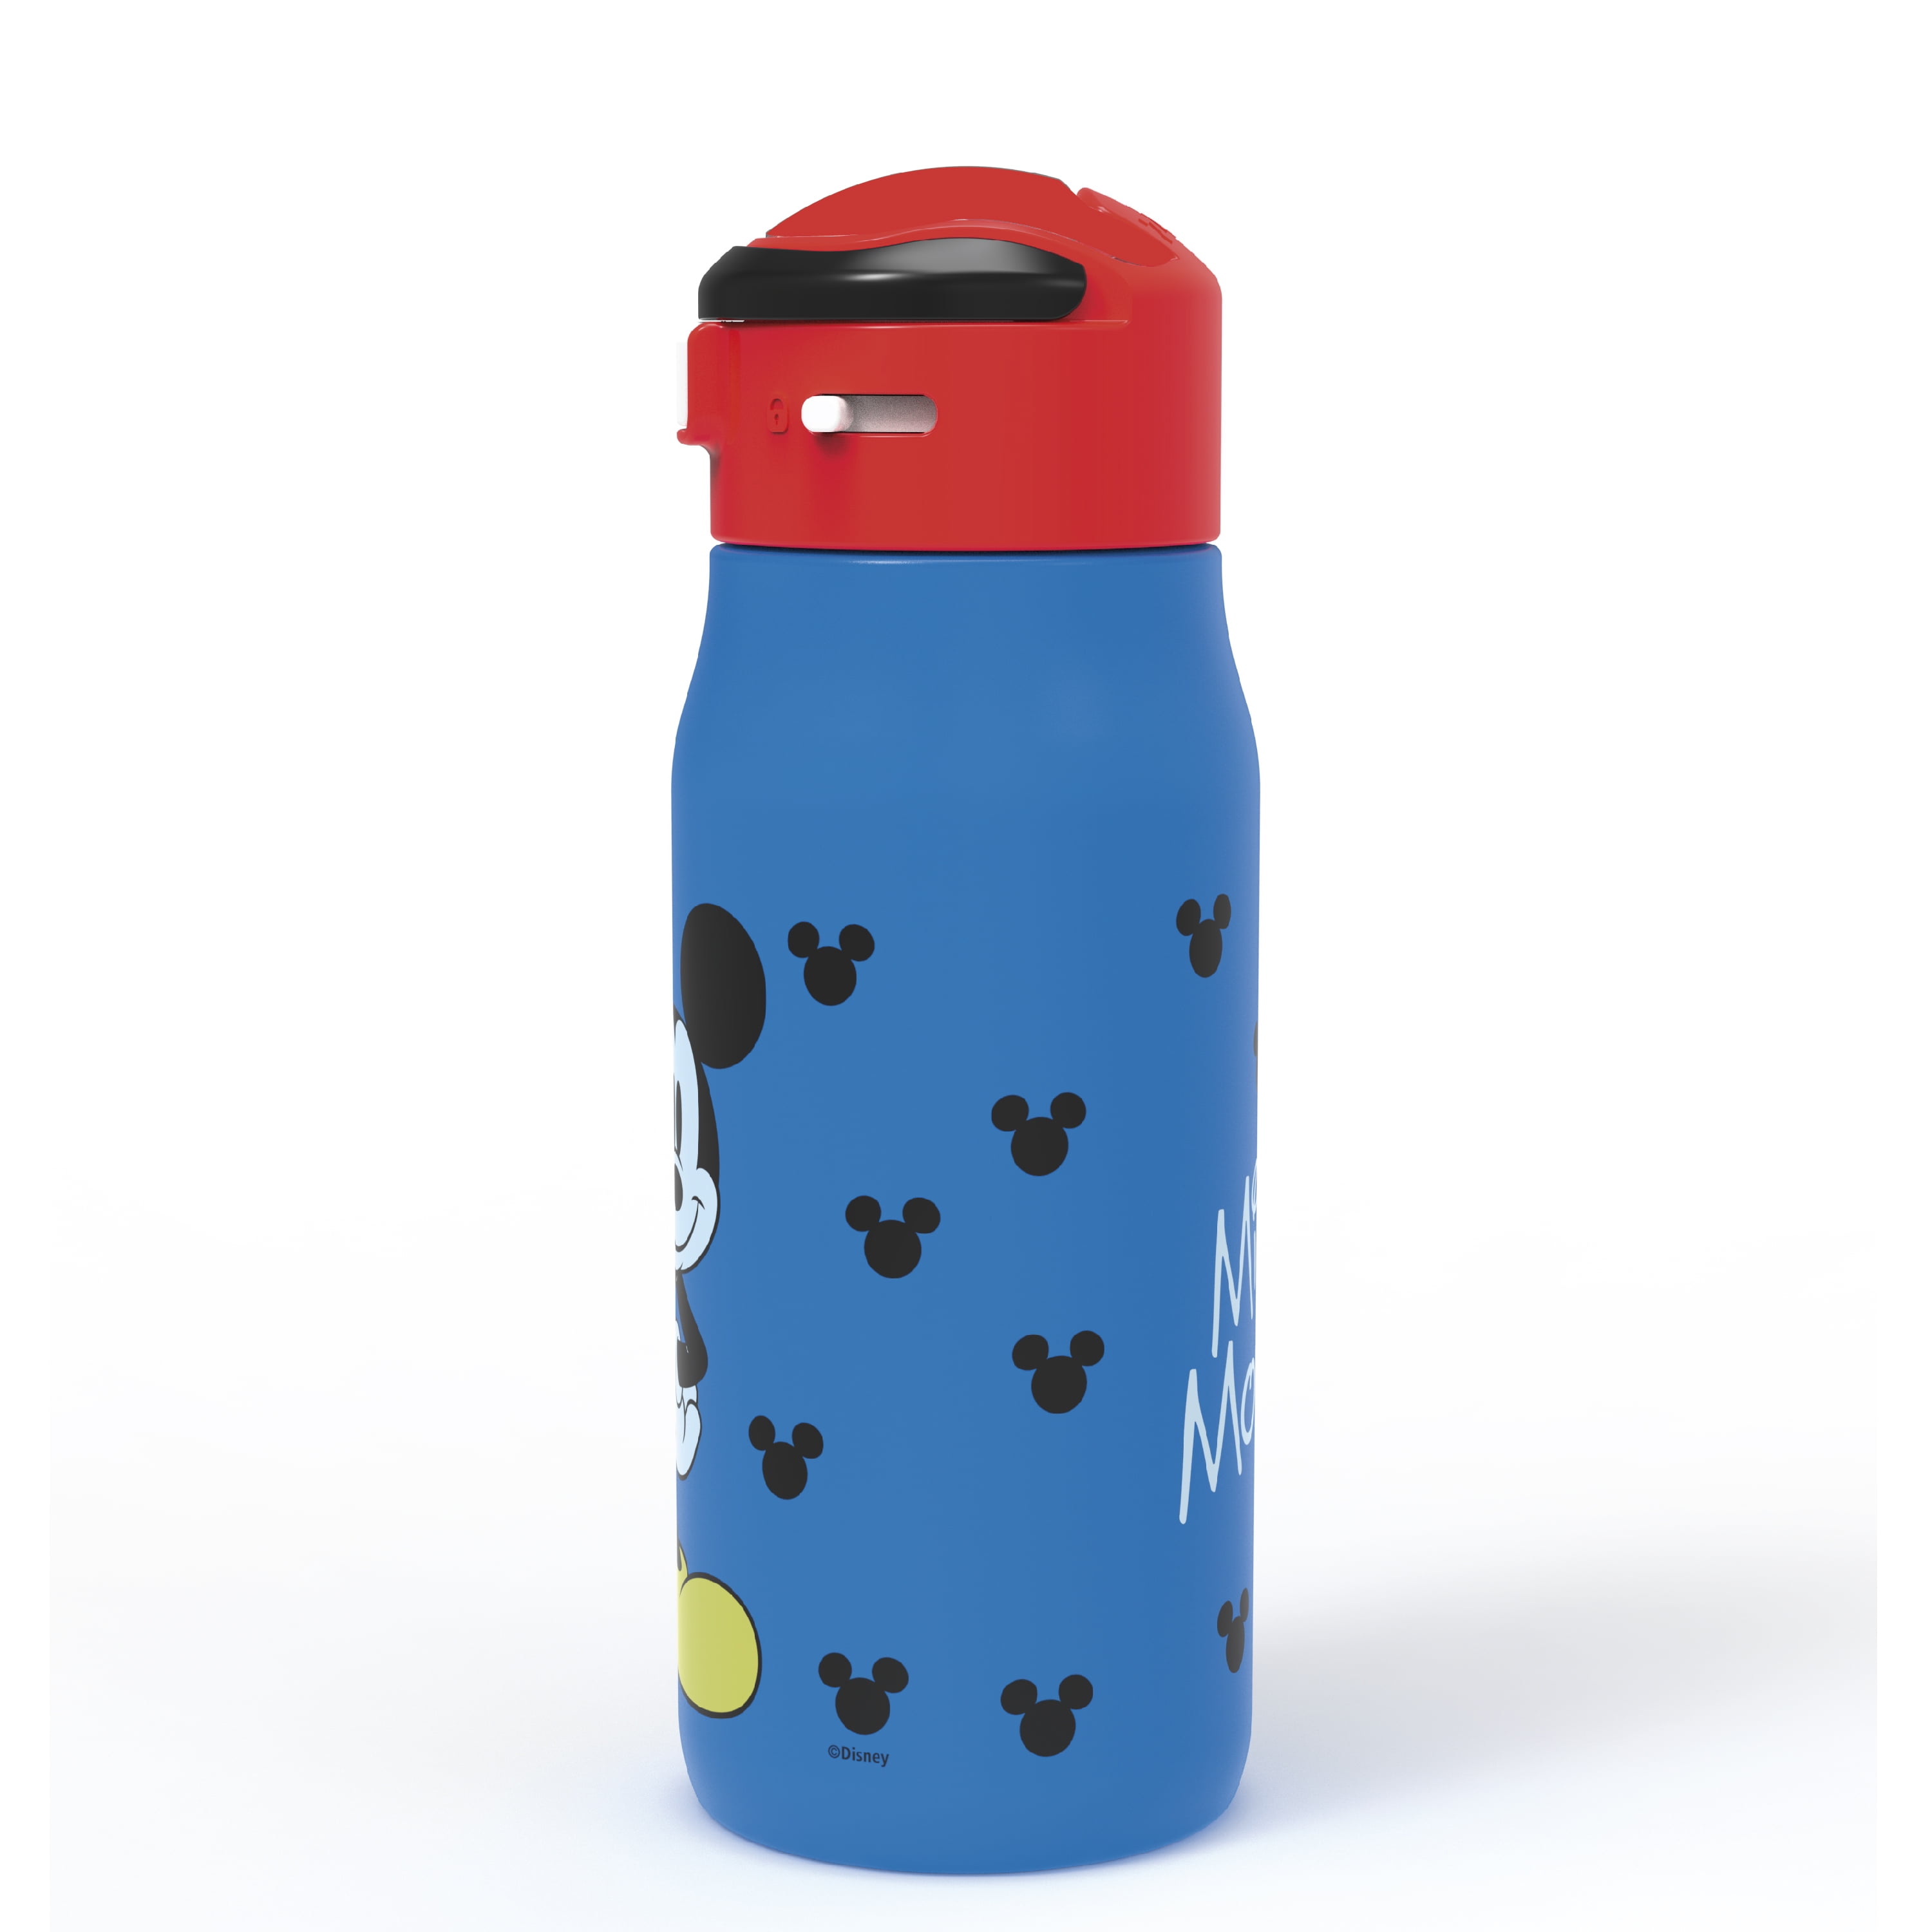 Minnie Mouse Stainless Steel Bottle for Kids - Disney Minnie Mouse Kid –